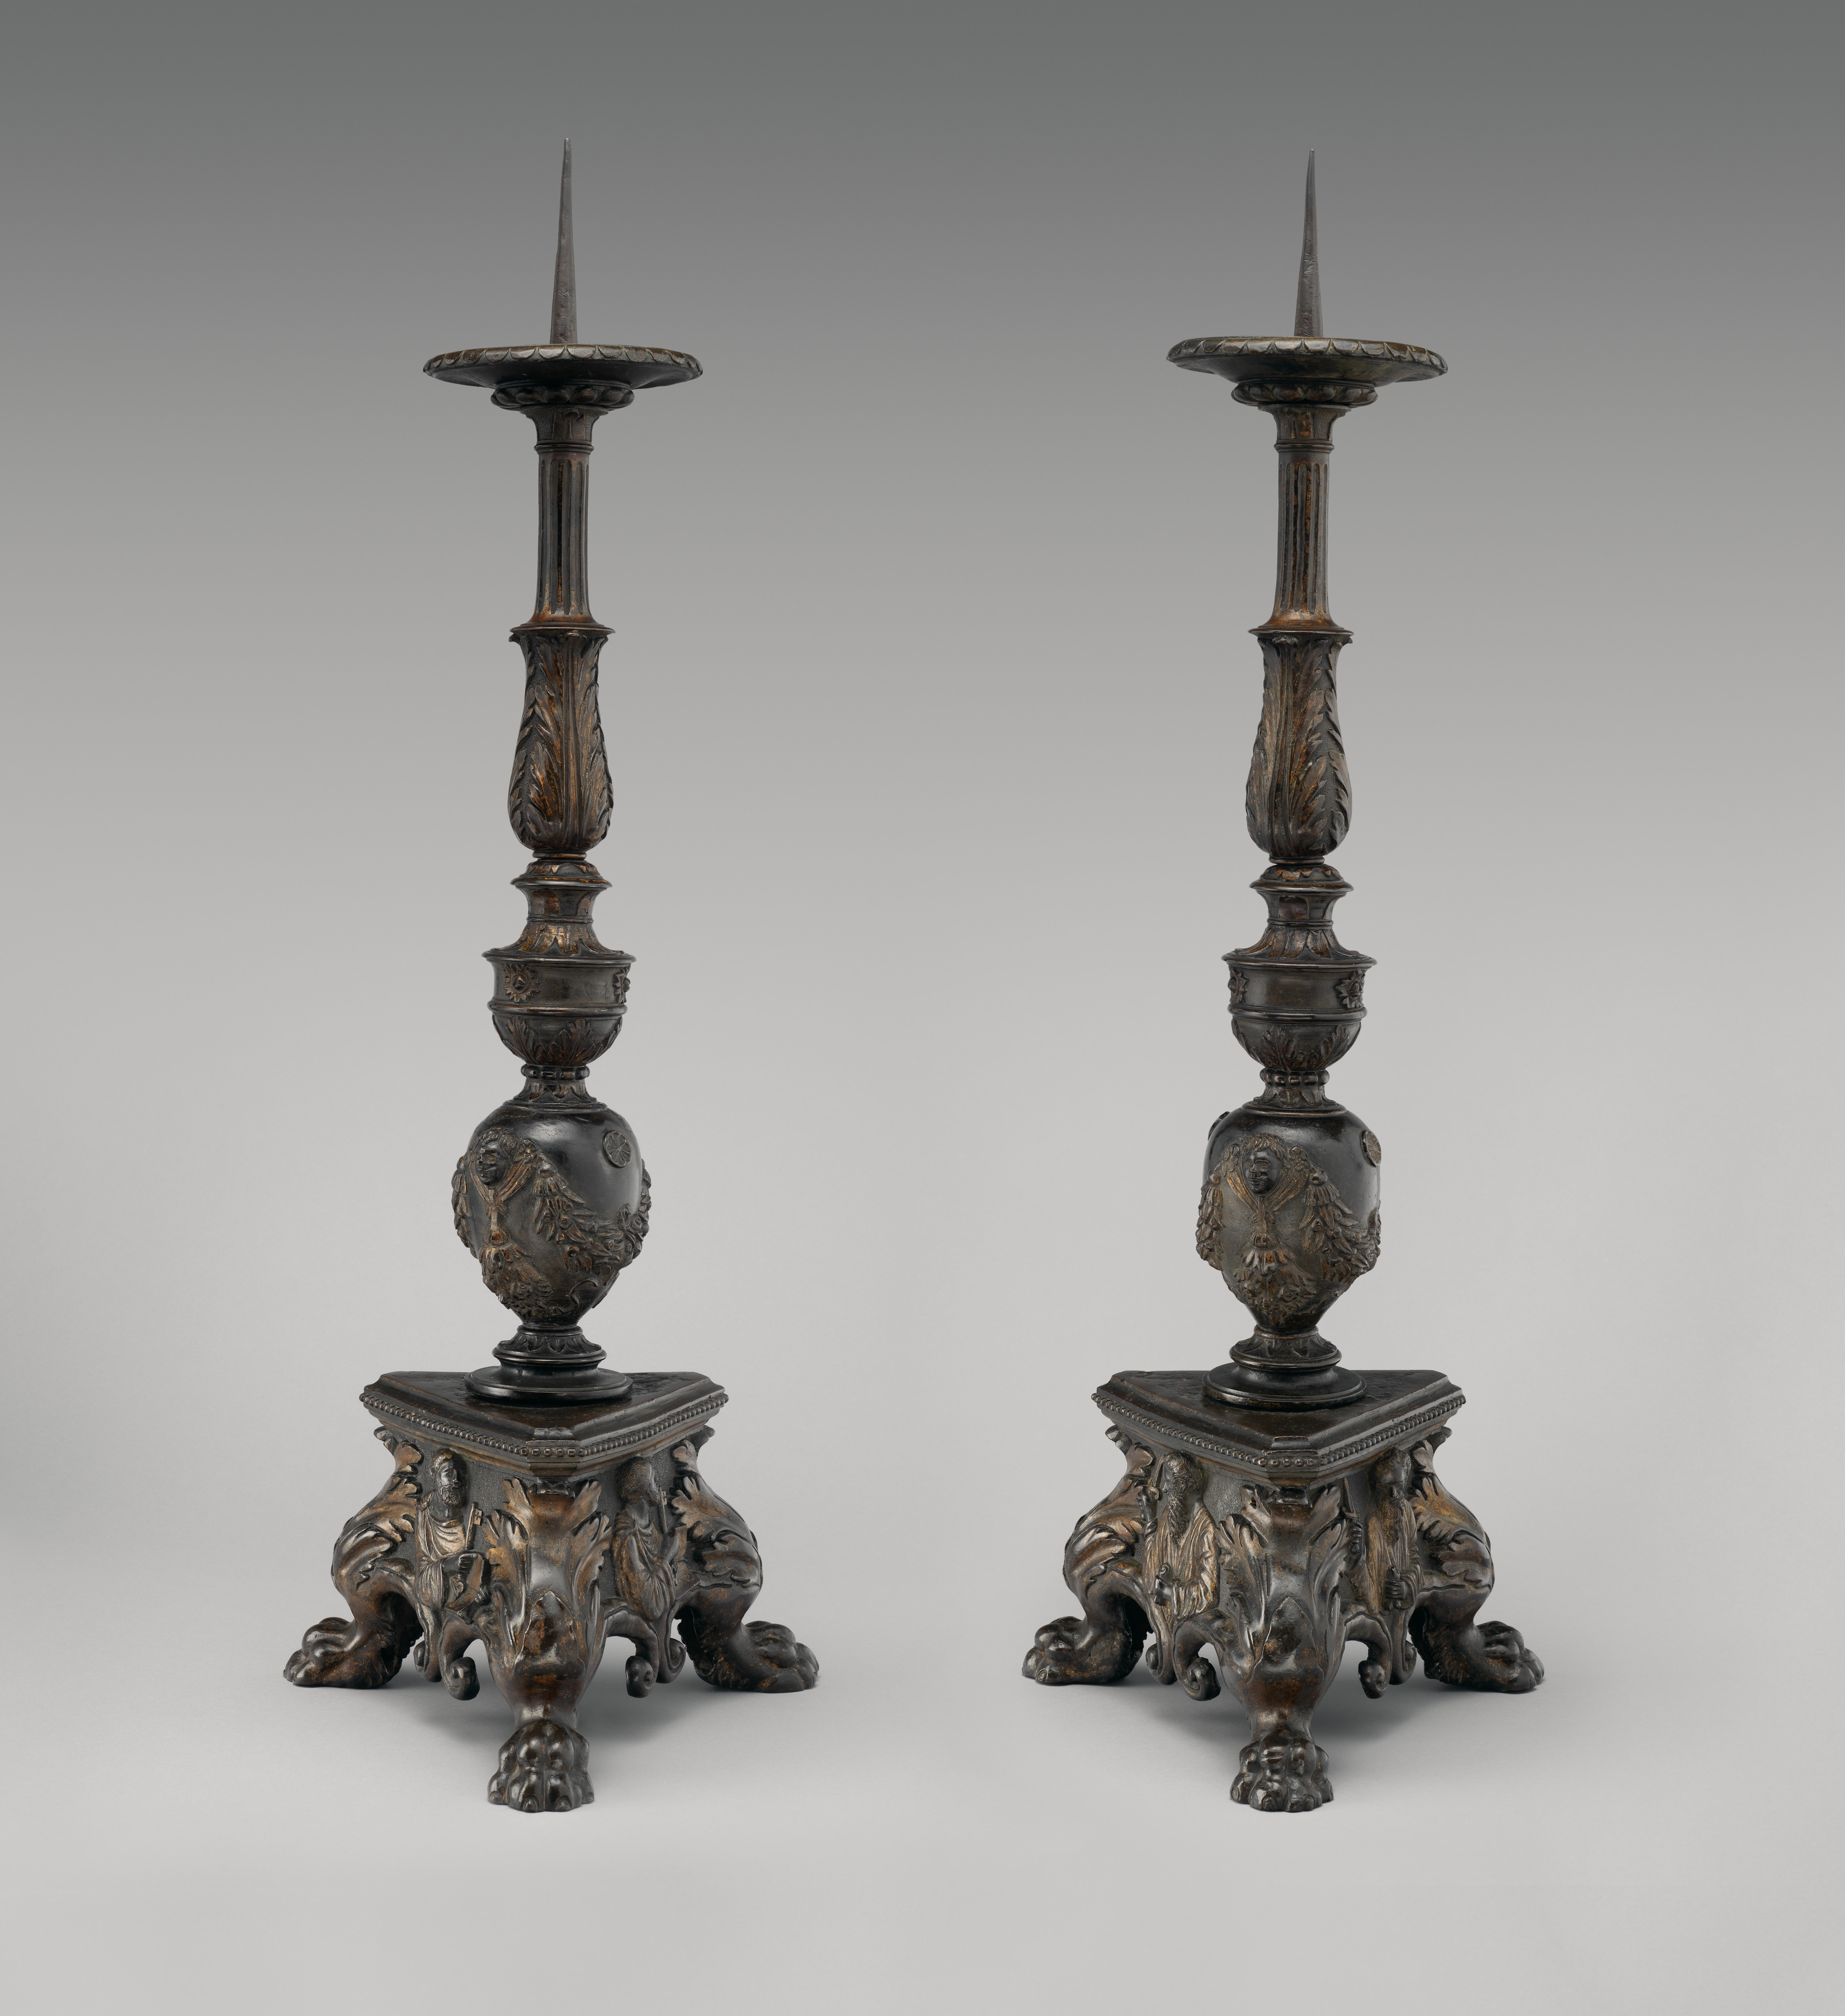 Workshop of Vincenzo Grandi, Altar candlestick with busts in relief of  Saints Peter and Paul (one of a pair), Northern Italian